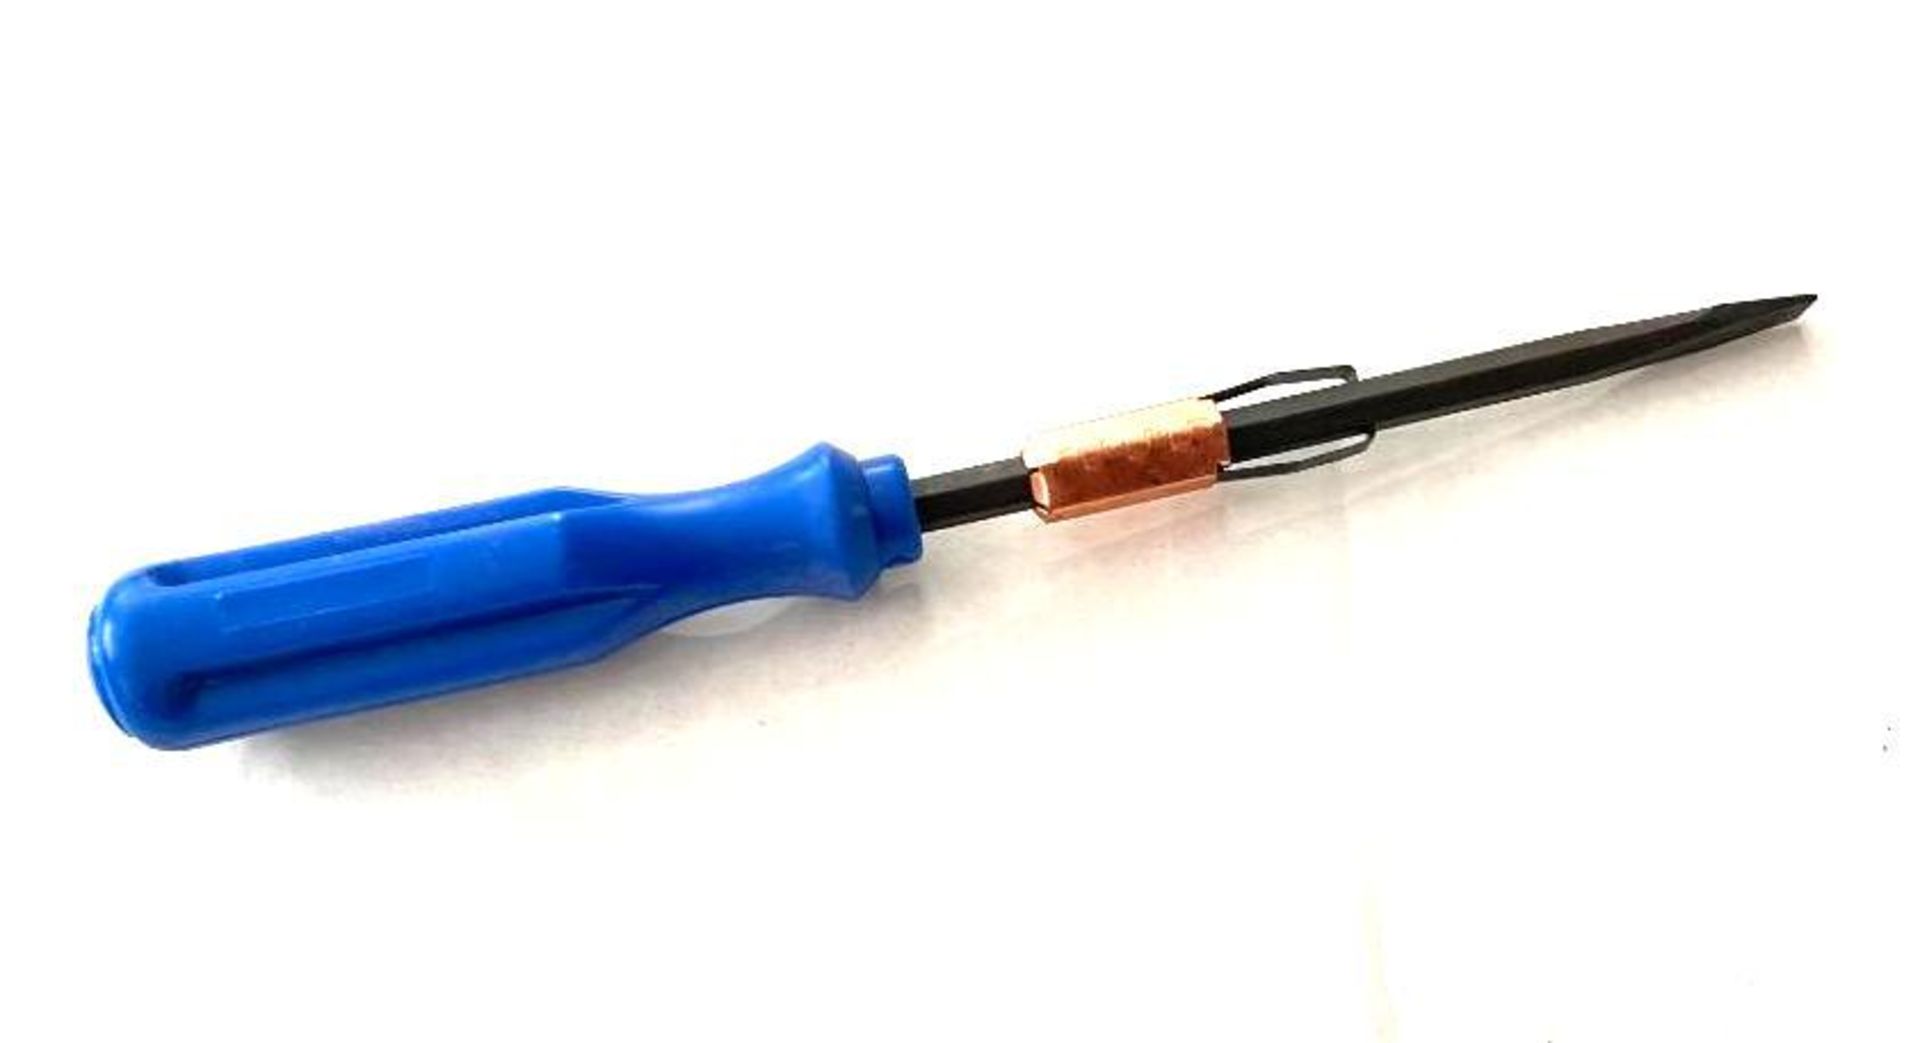 200CT 6" SPRING CLIP SCREWDRIVERS BRAND/MODEL EAZYPOWER 82796 ADDITIONAL INFO TOTAL LOT RETAIL PRICE